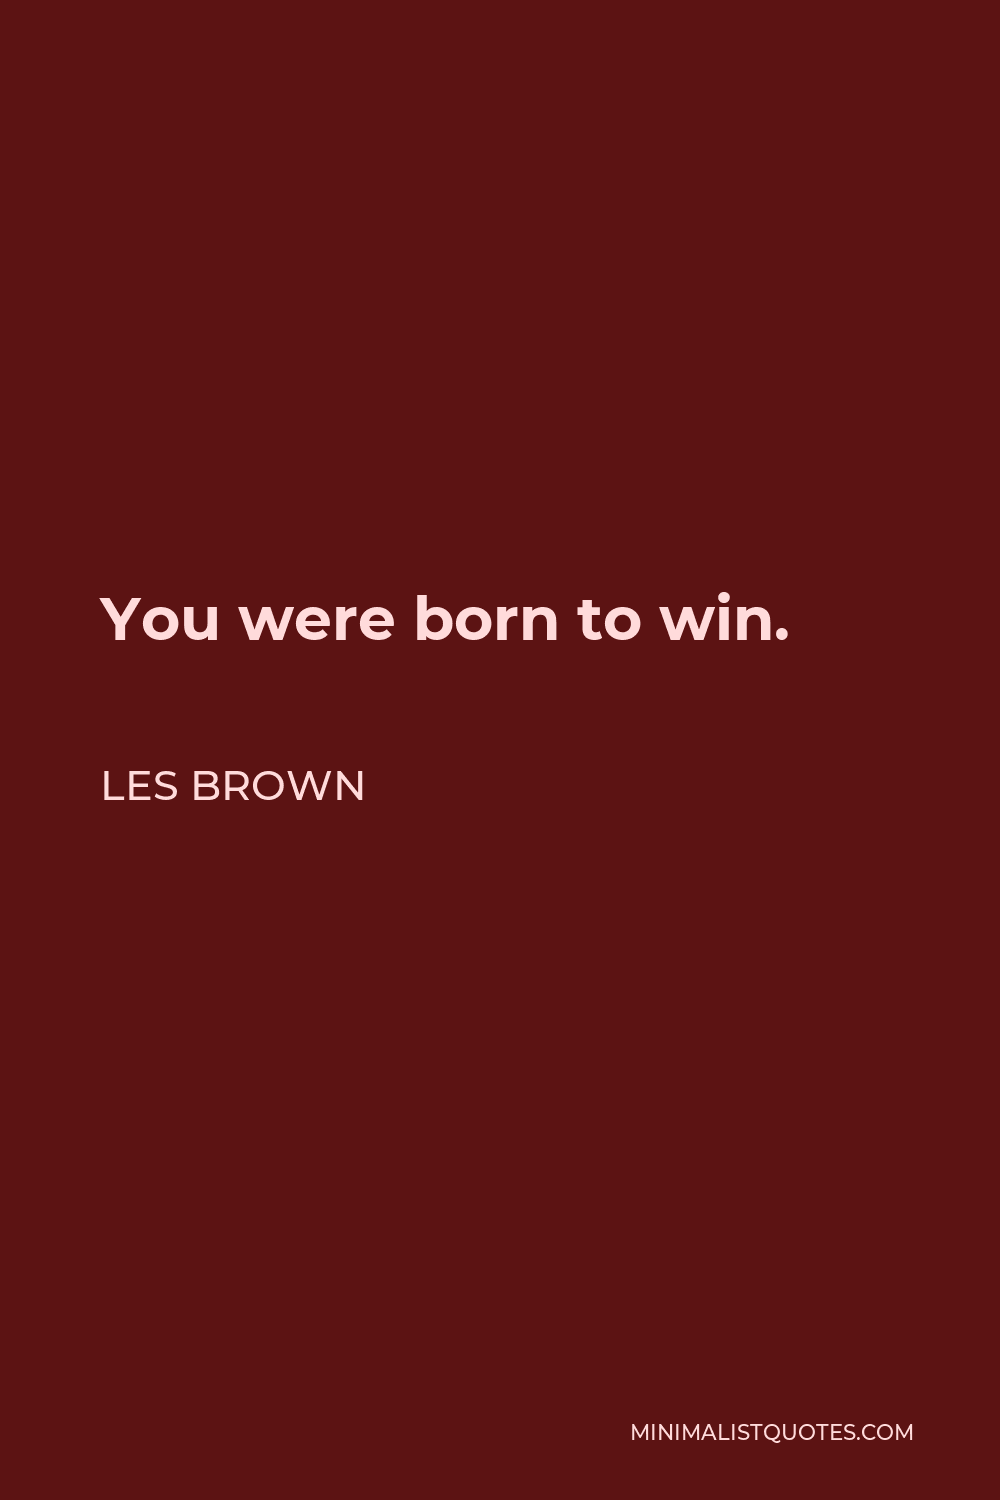 Les Brown Quote - You were born to win.